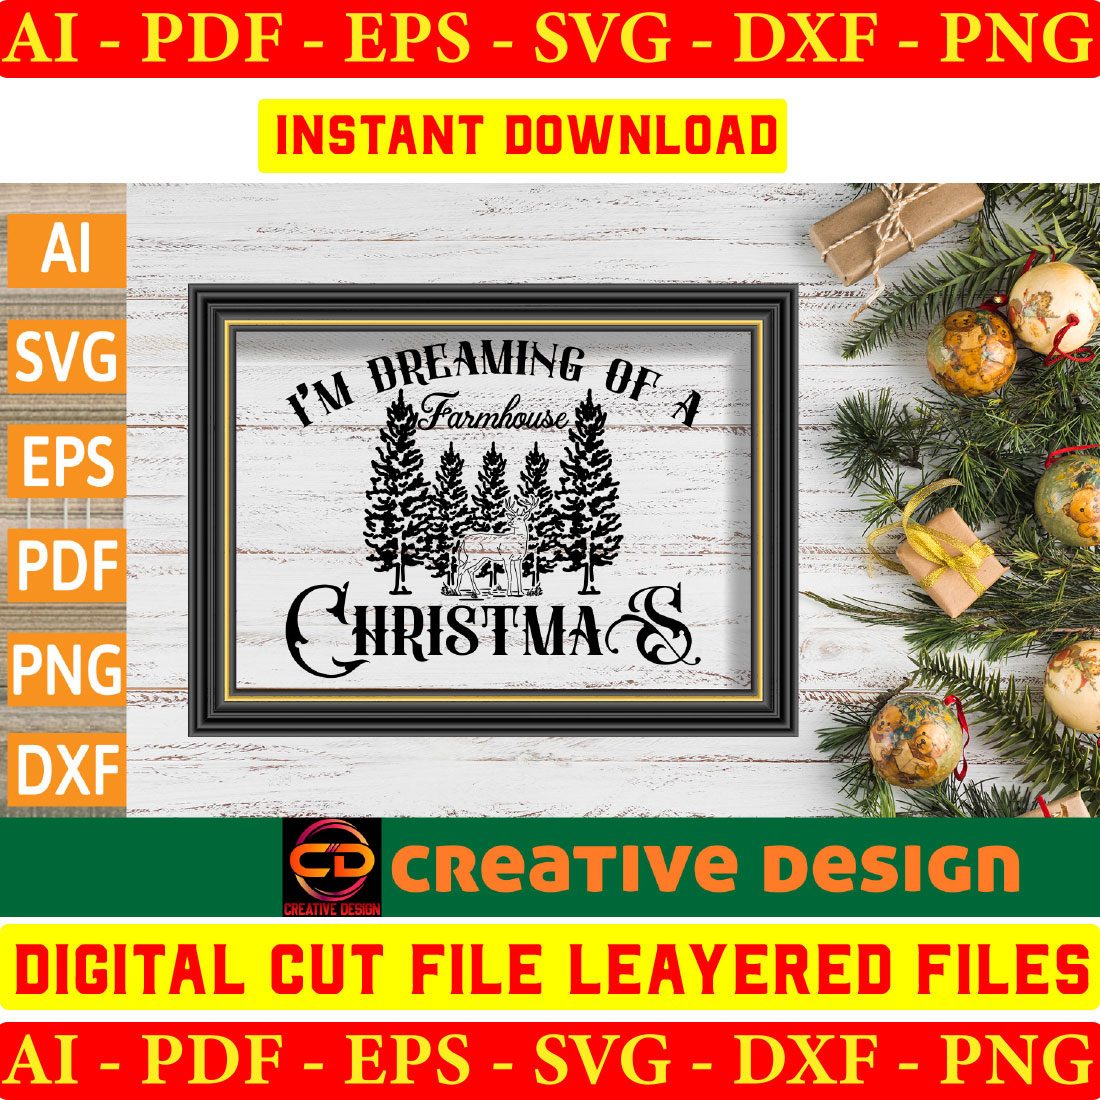 I'm dreaming of a christmas svg file.